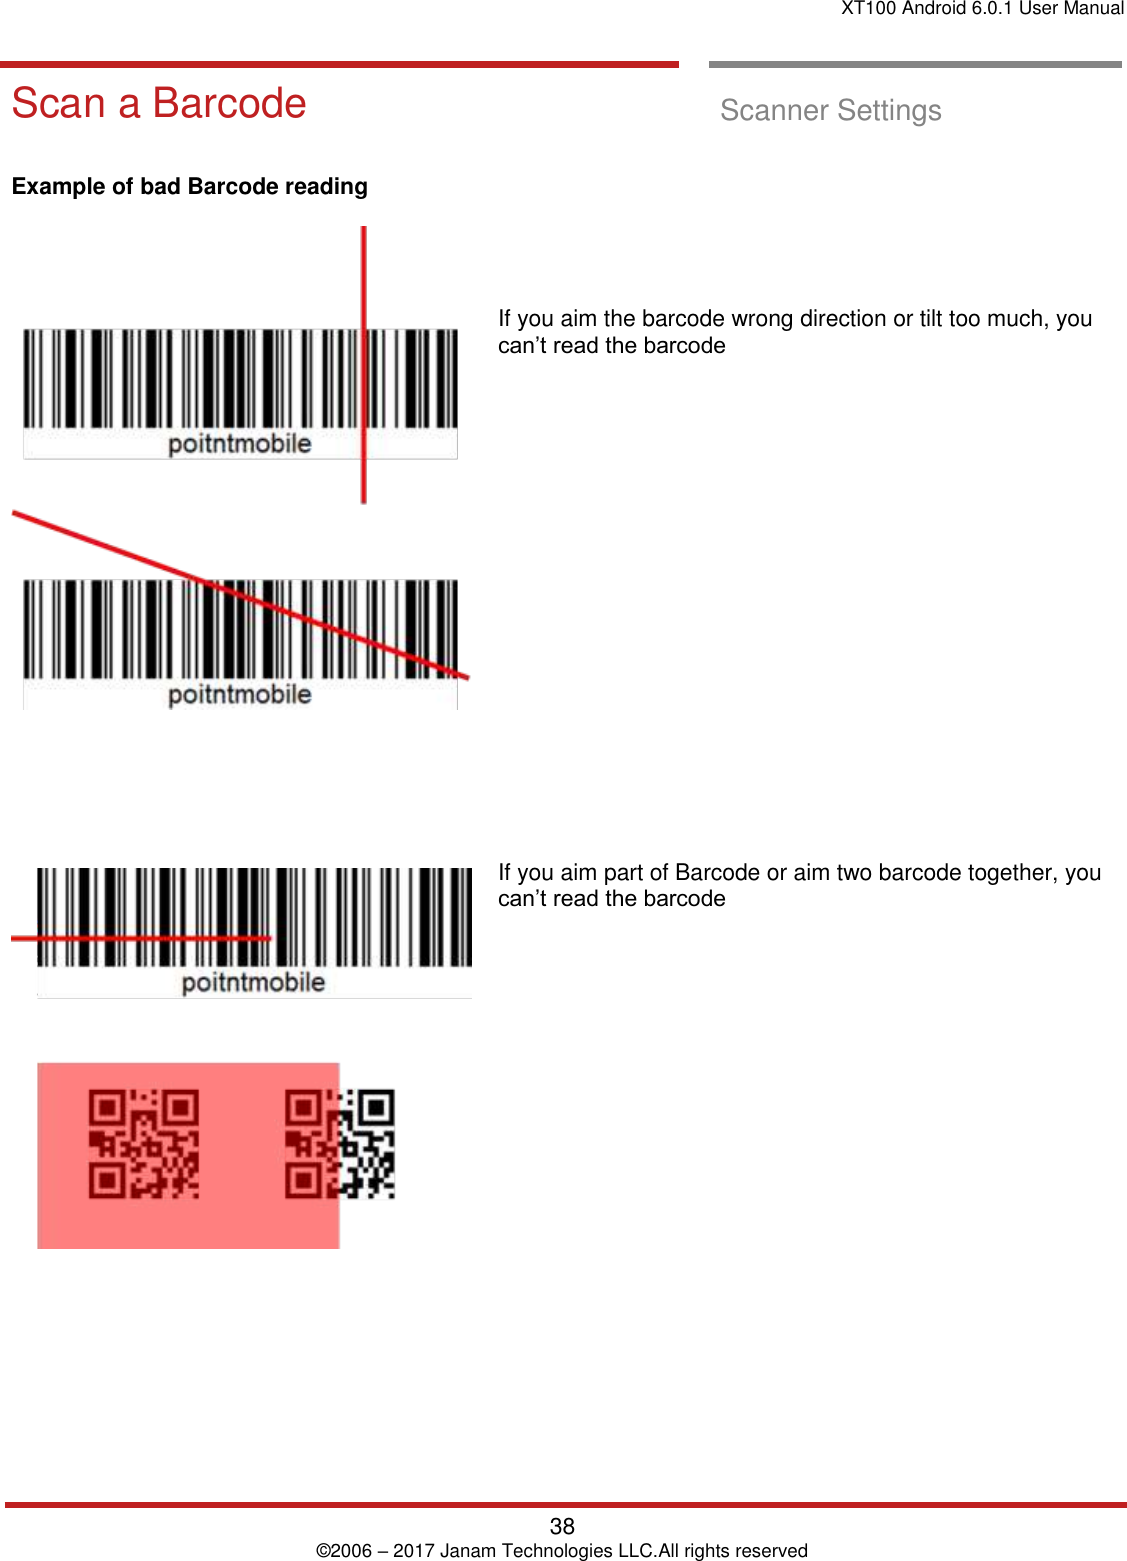 XT100 Android 6.0.1 User Manual   38 © 2006 – 2017 Janam Technologies LLC.All rights reserved  Scan a Barcode Scan a Barcode  Scanner Settings      Example of bad Barcode reading                If you aim the barcode wrong direction or tilt too much, you can’t read the barcode                      If you aim part of Barcode or aim two barcode together, you can’t read the barcode   